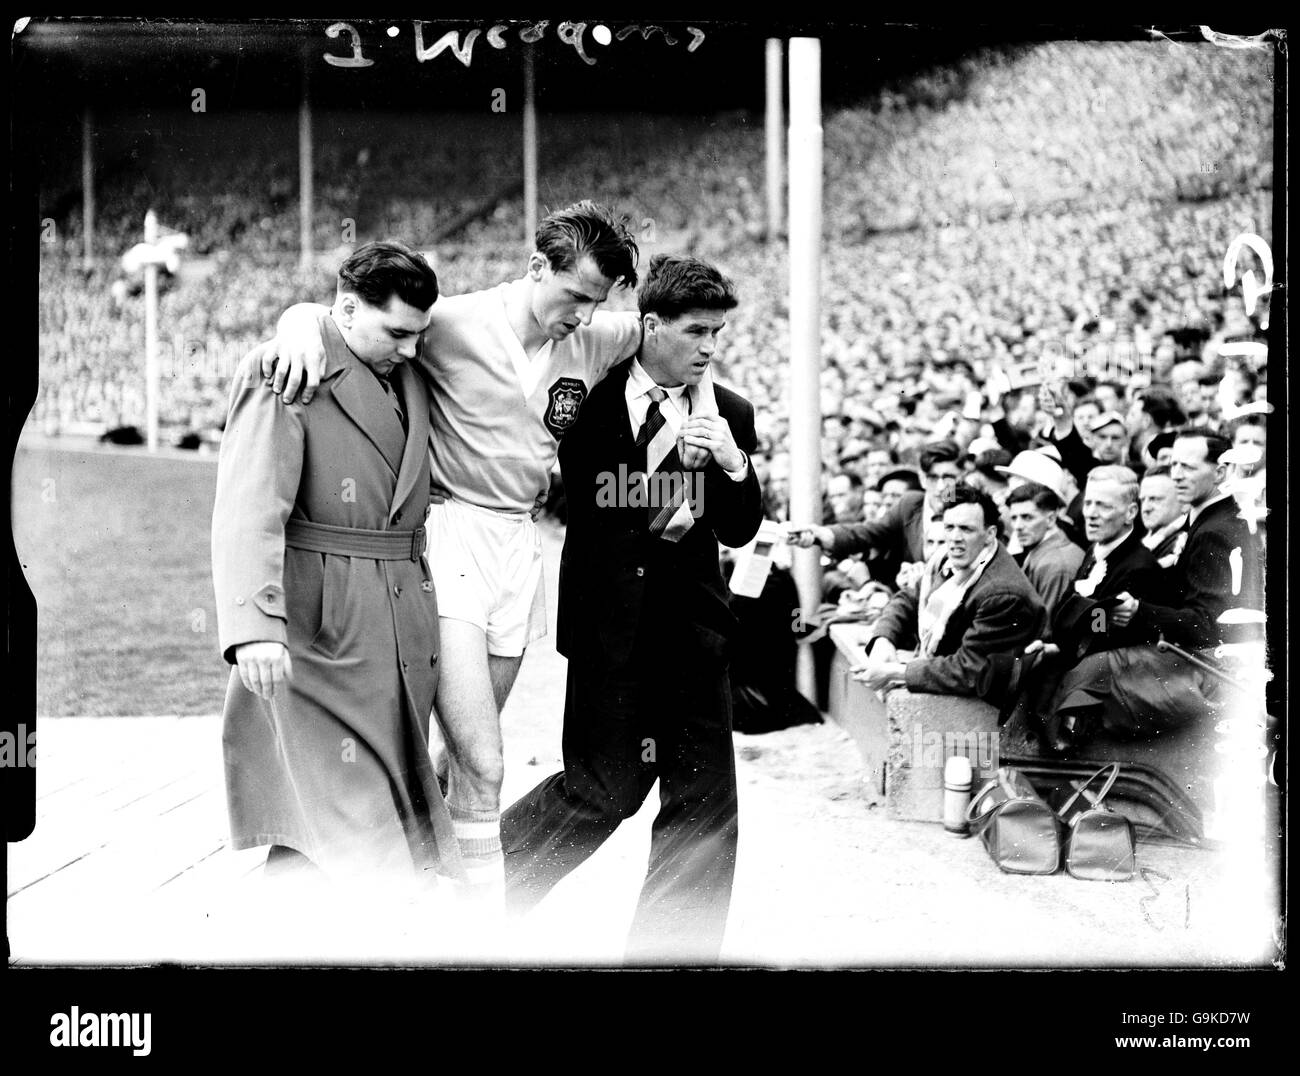 Soccer - FA Cup Final - Newcastle United v Manchester City - Wembley Stadium. Manchester City's Jimmy Meadows (c) is helped off injured after just 18 minutes Stock Photo